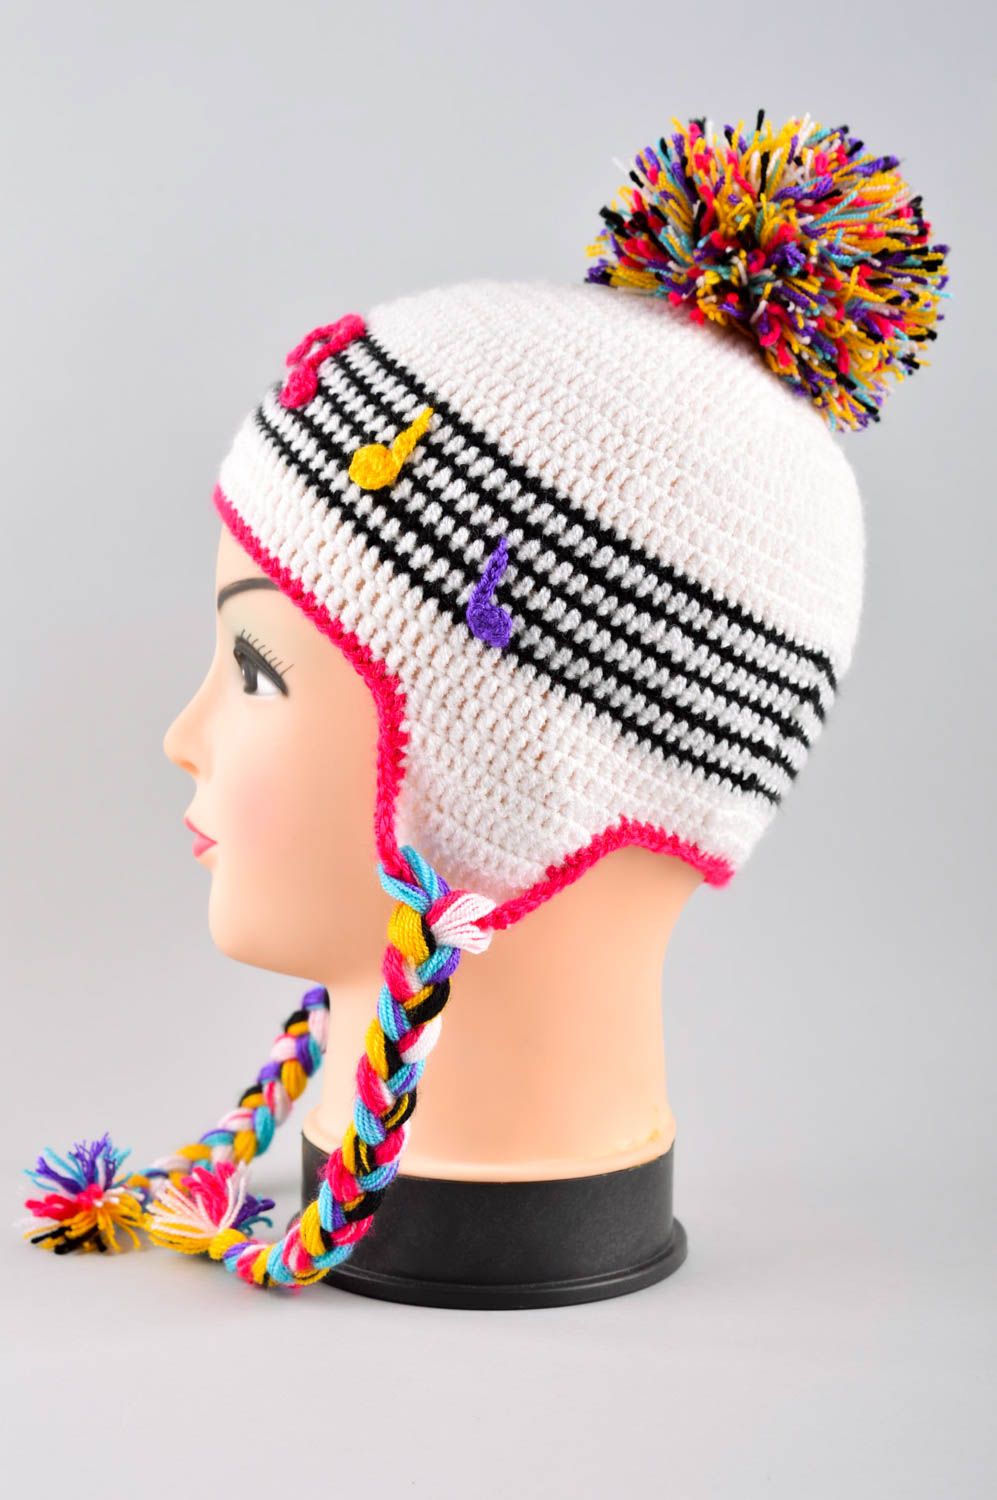 Handmade accessories for kids warm winter hat crochet baby hat gifts for girls photo 3